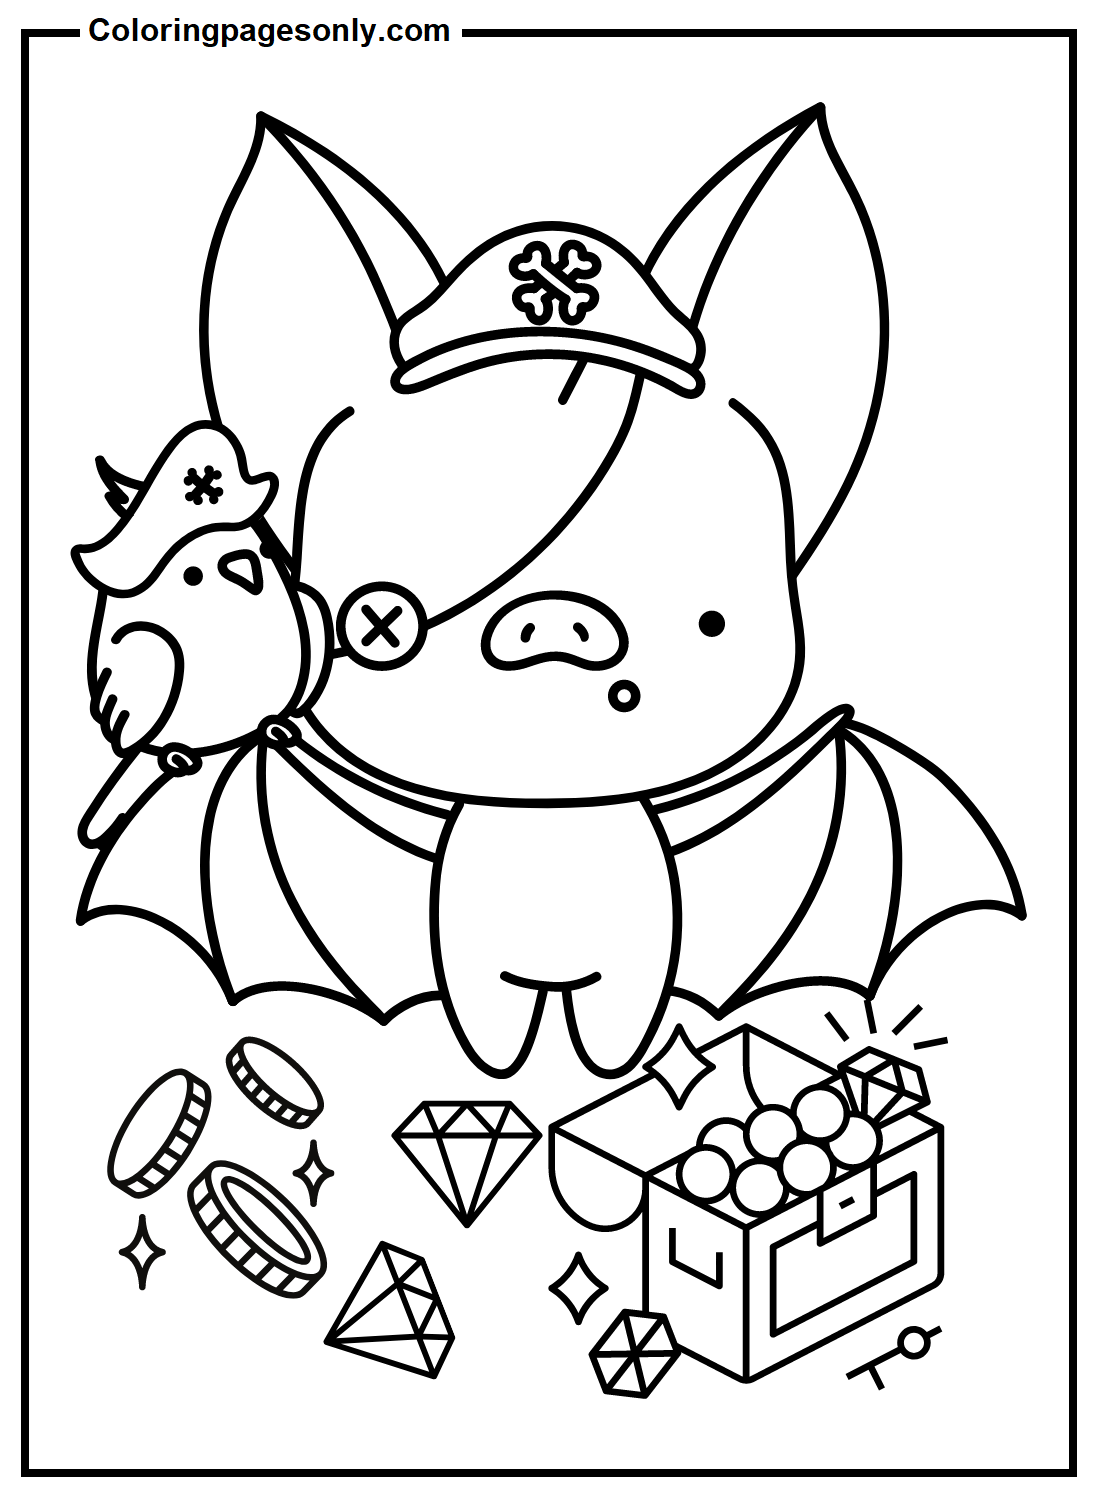 Bat in Pirate Costume Coloring Page